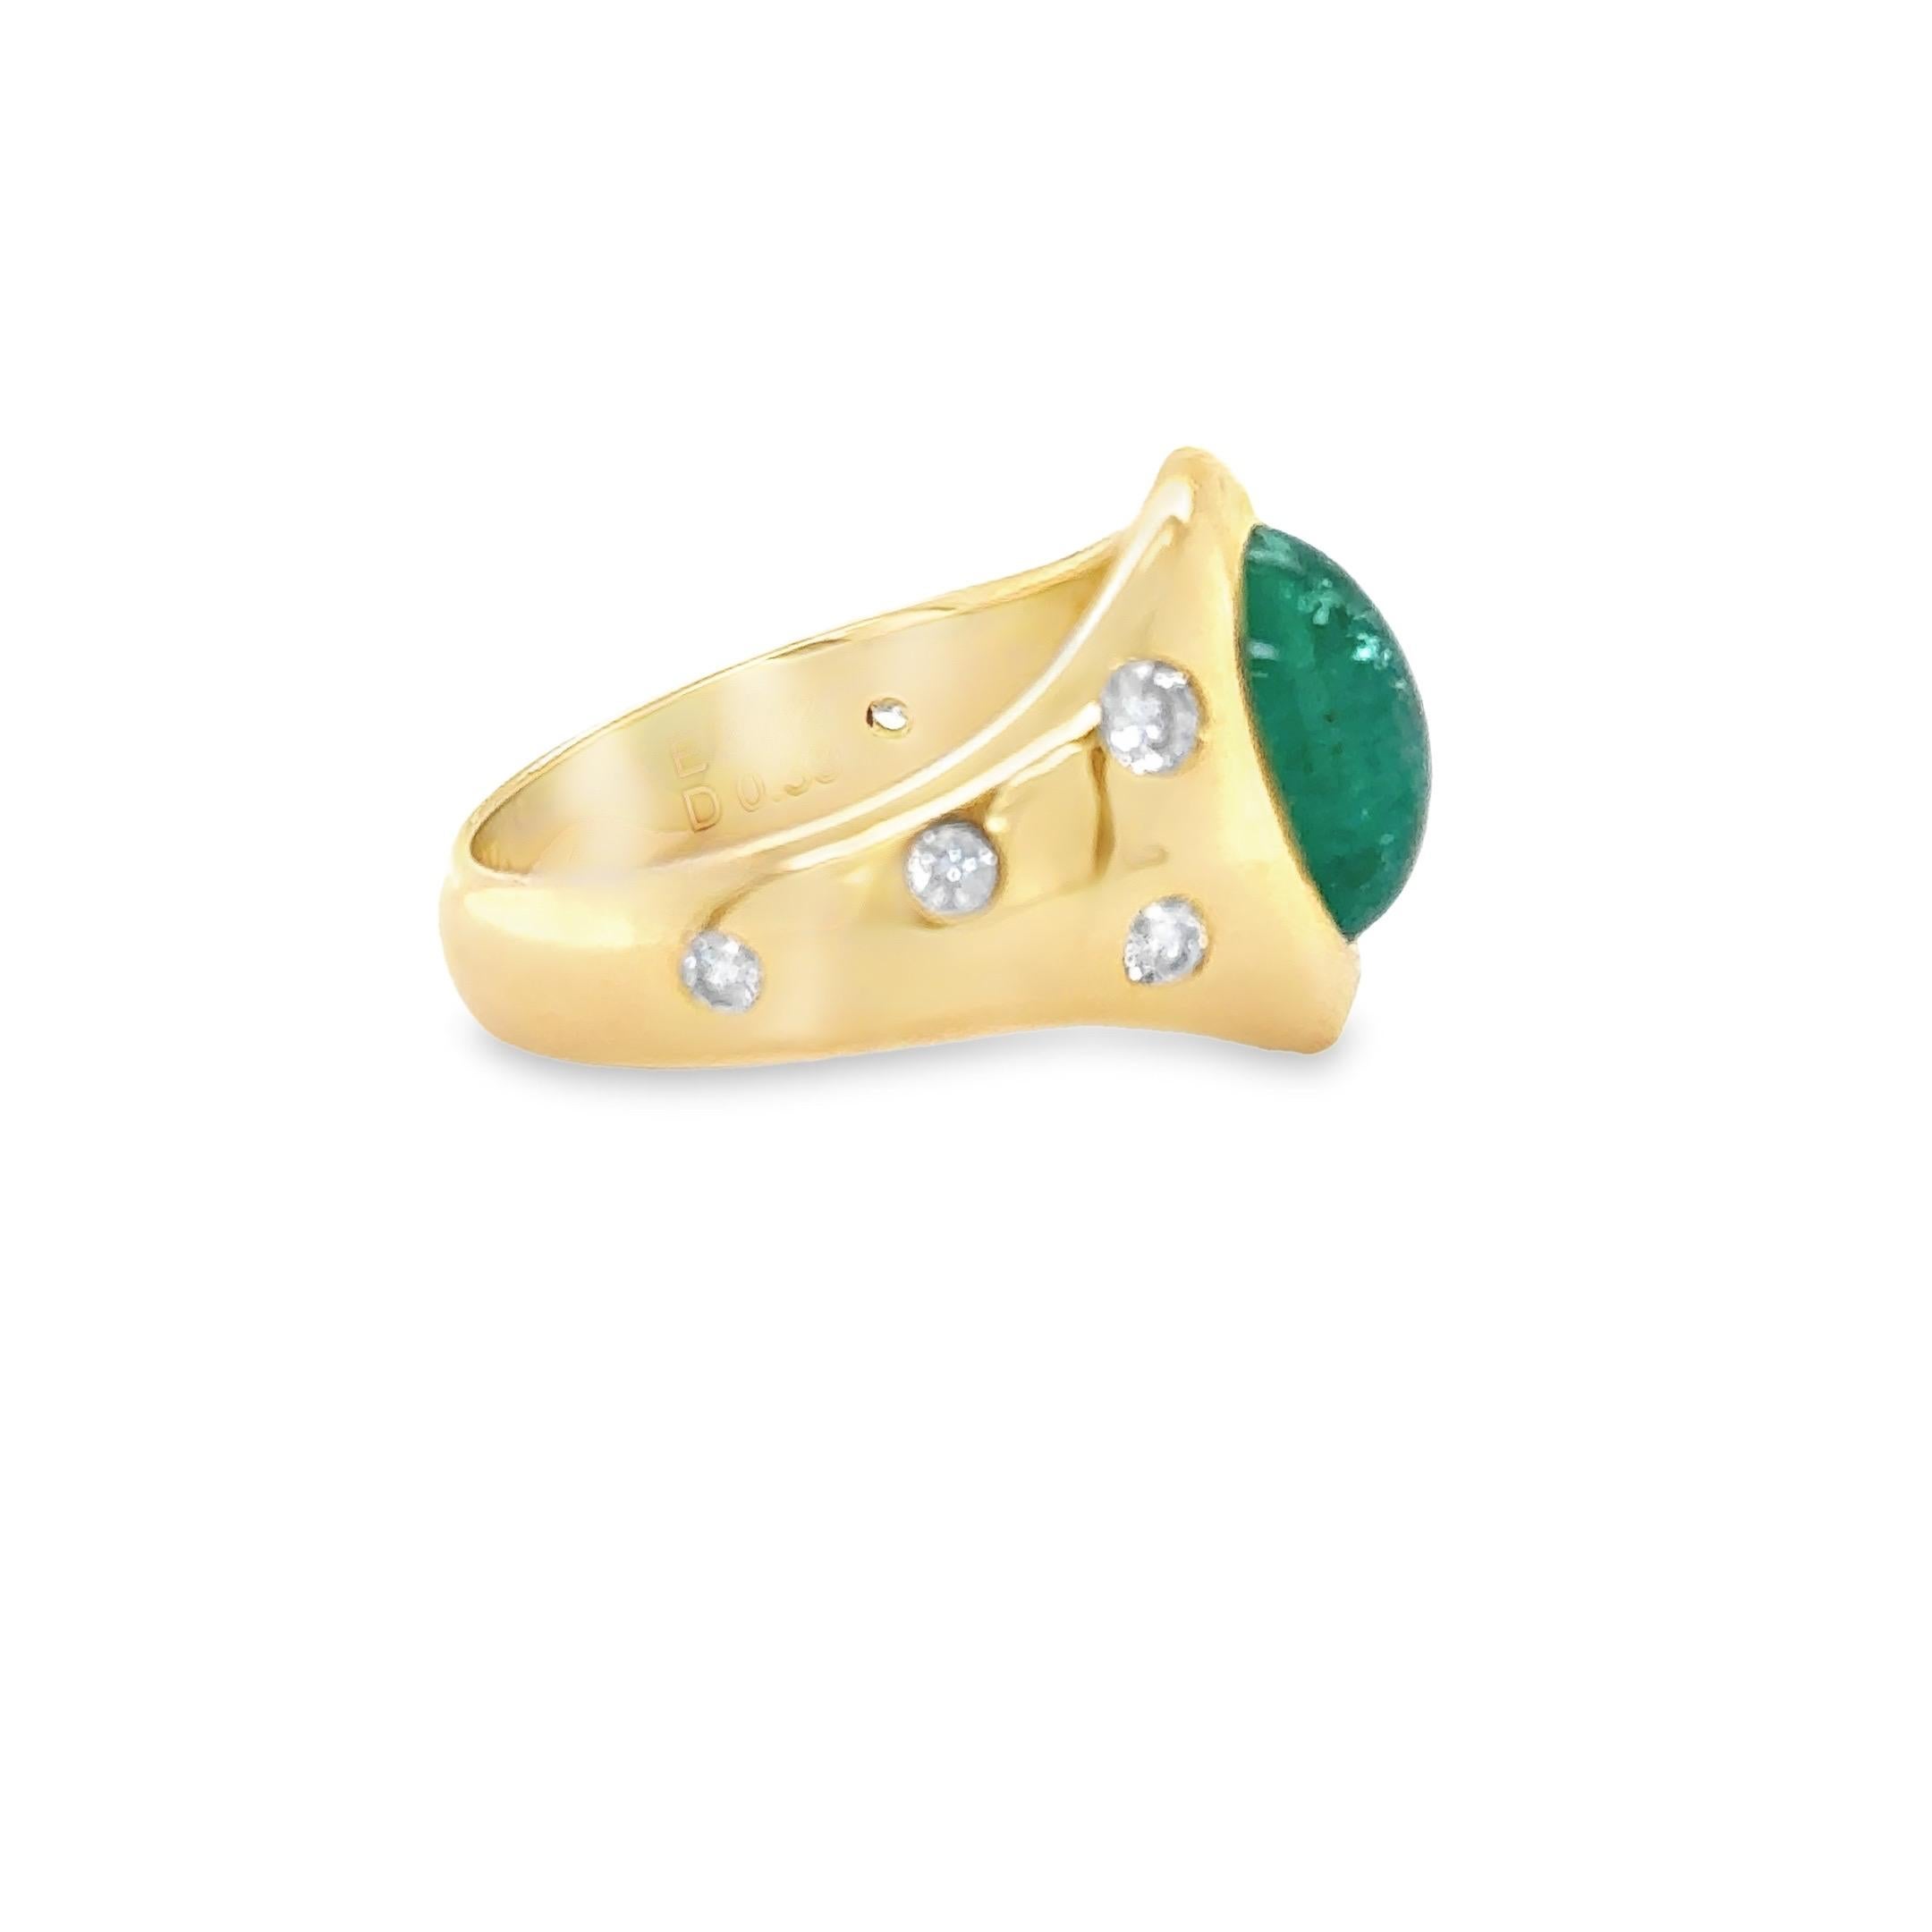 Contemporary 3.42 Carats Oval Cabochon Emerald & Diamond Ring For Sale